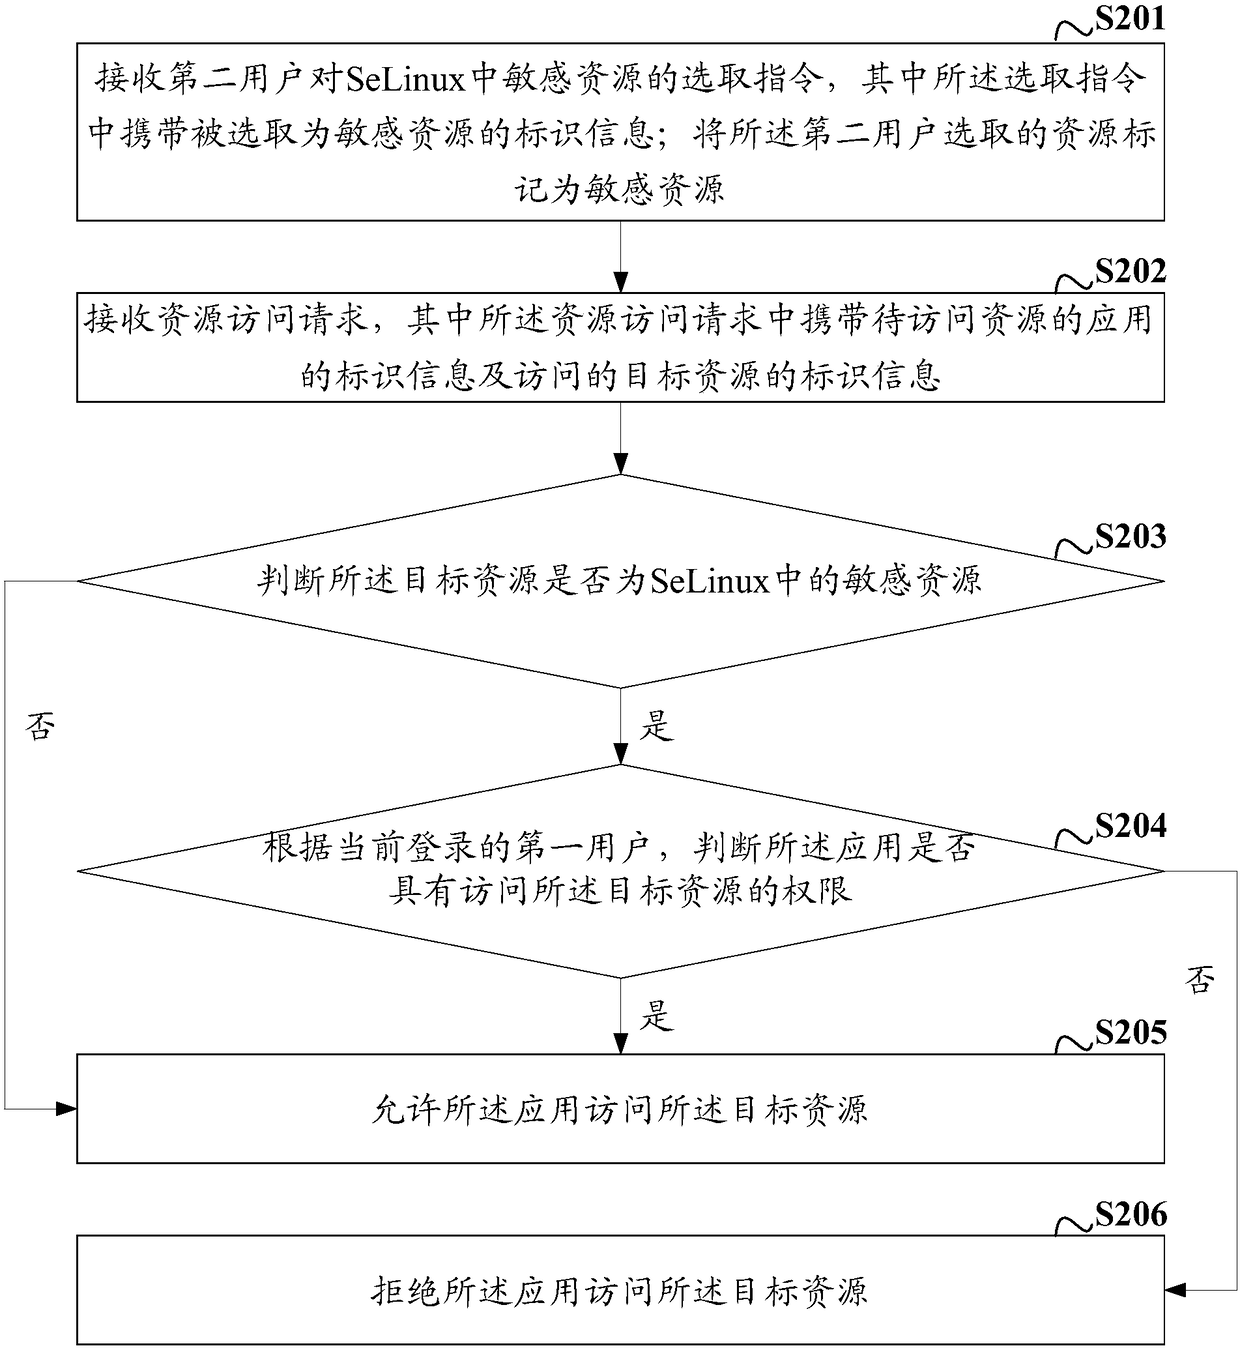 SeLinux-based resource access method and device under multiple users